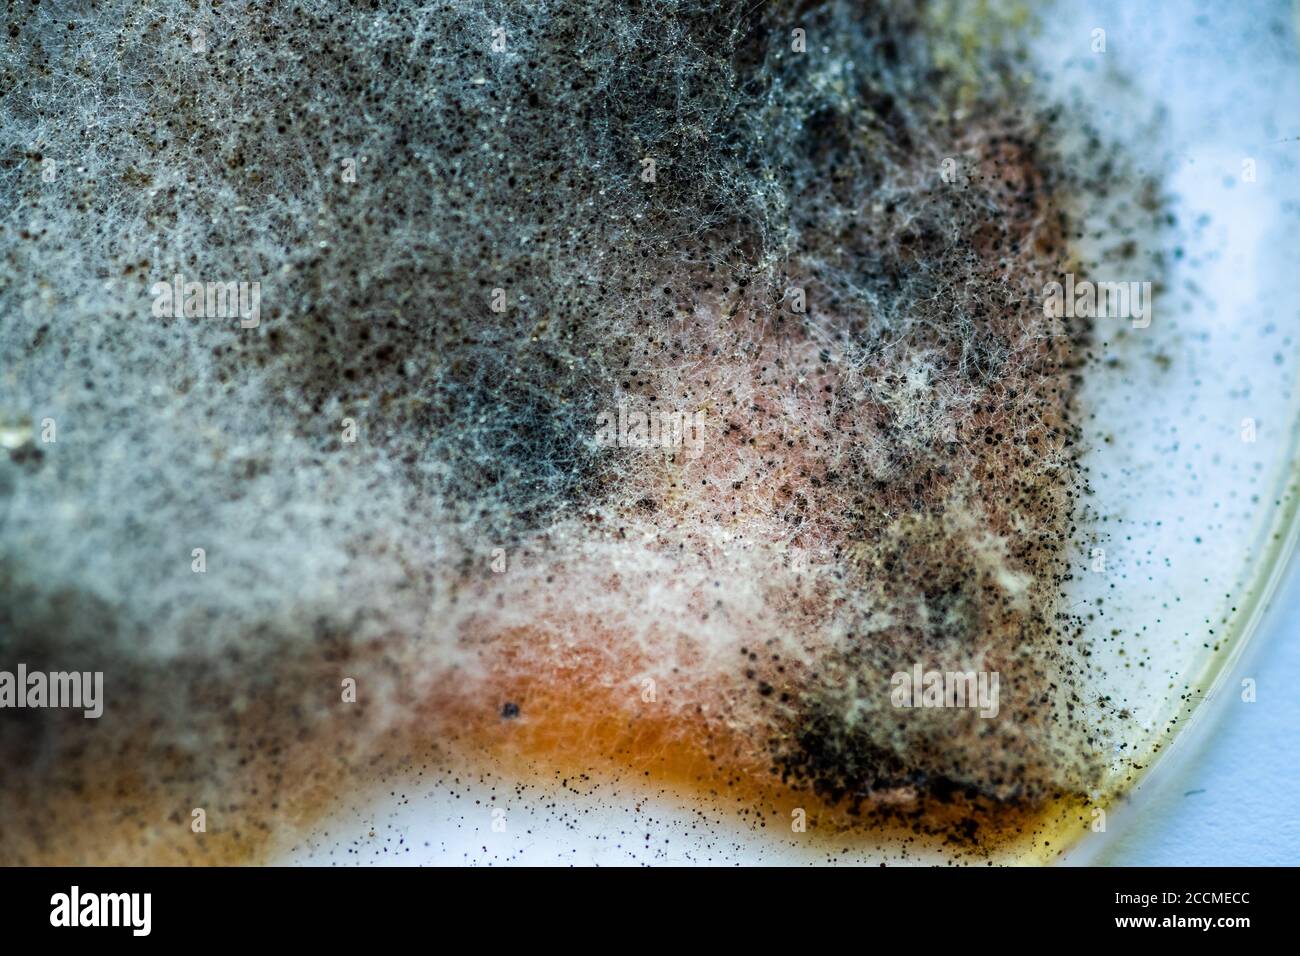 A piece of food covered with mold and pathogenic fungi rotates close-up Stock Photo